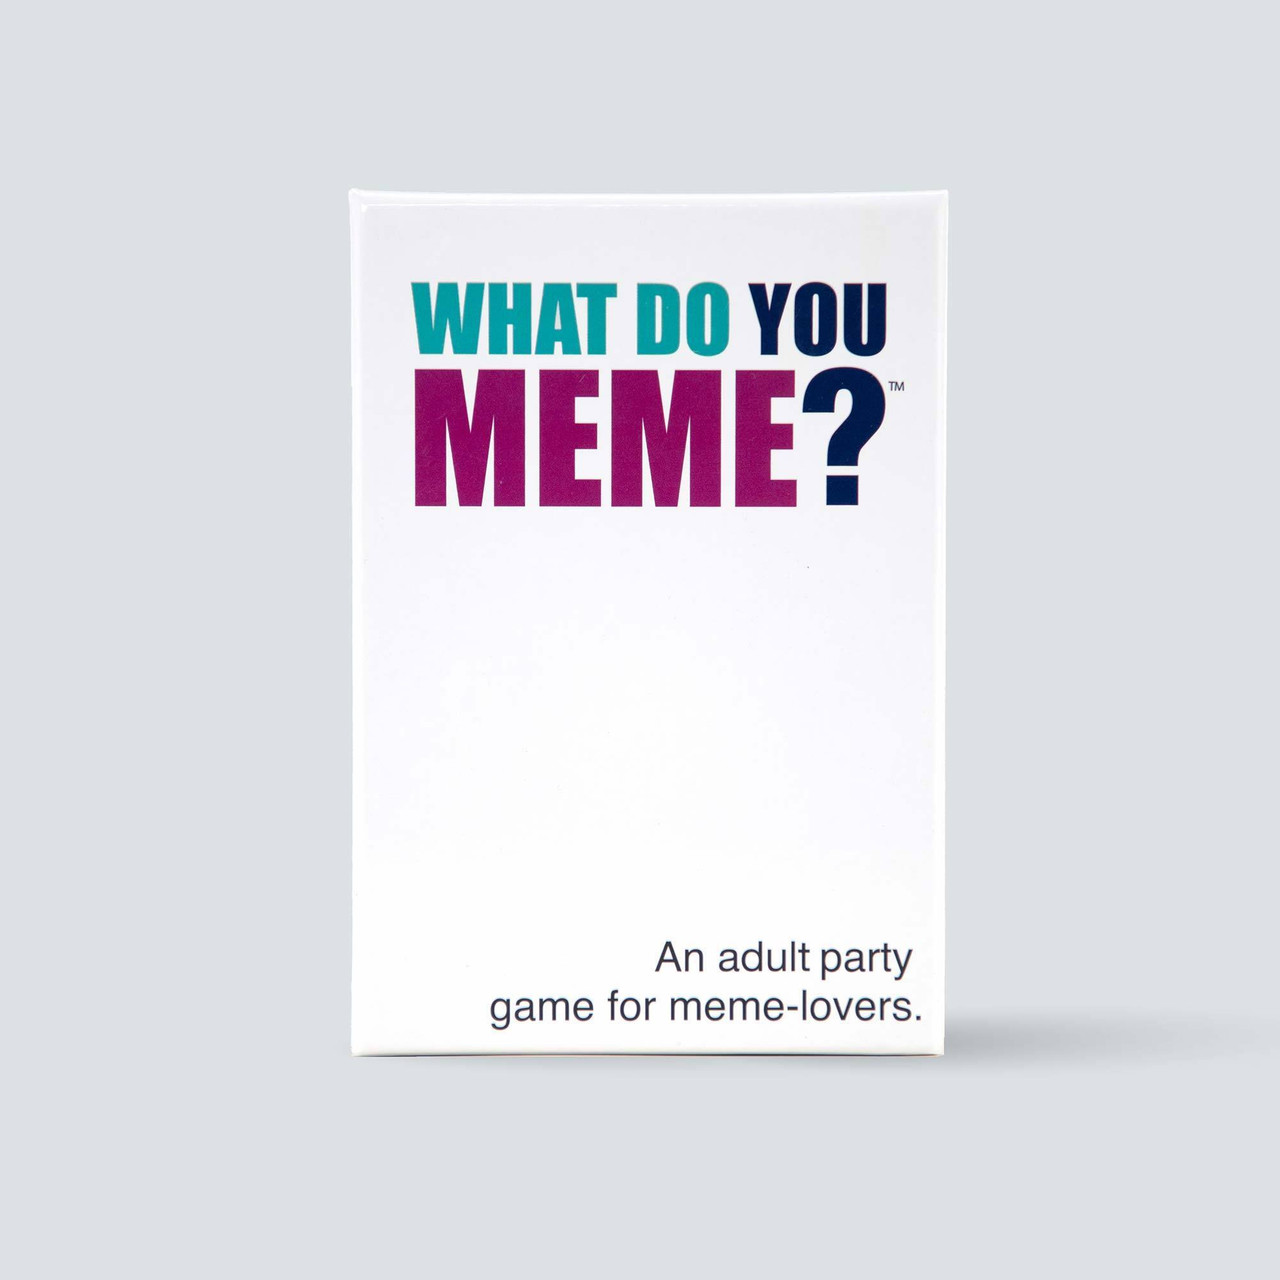 What Do You Meme Core Game The Hilarious Adult Party Game for Meme Lovers